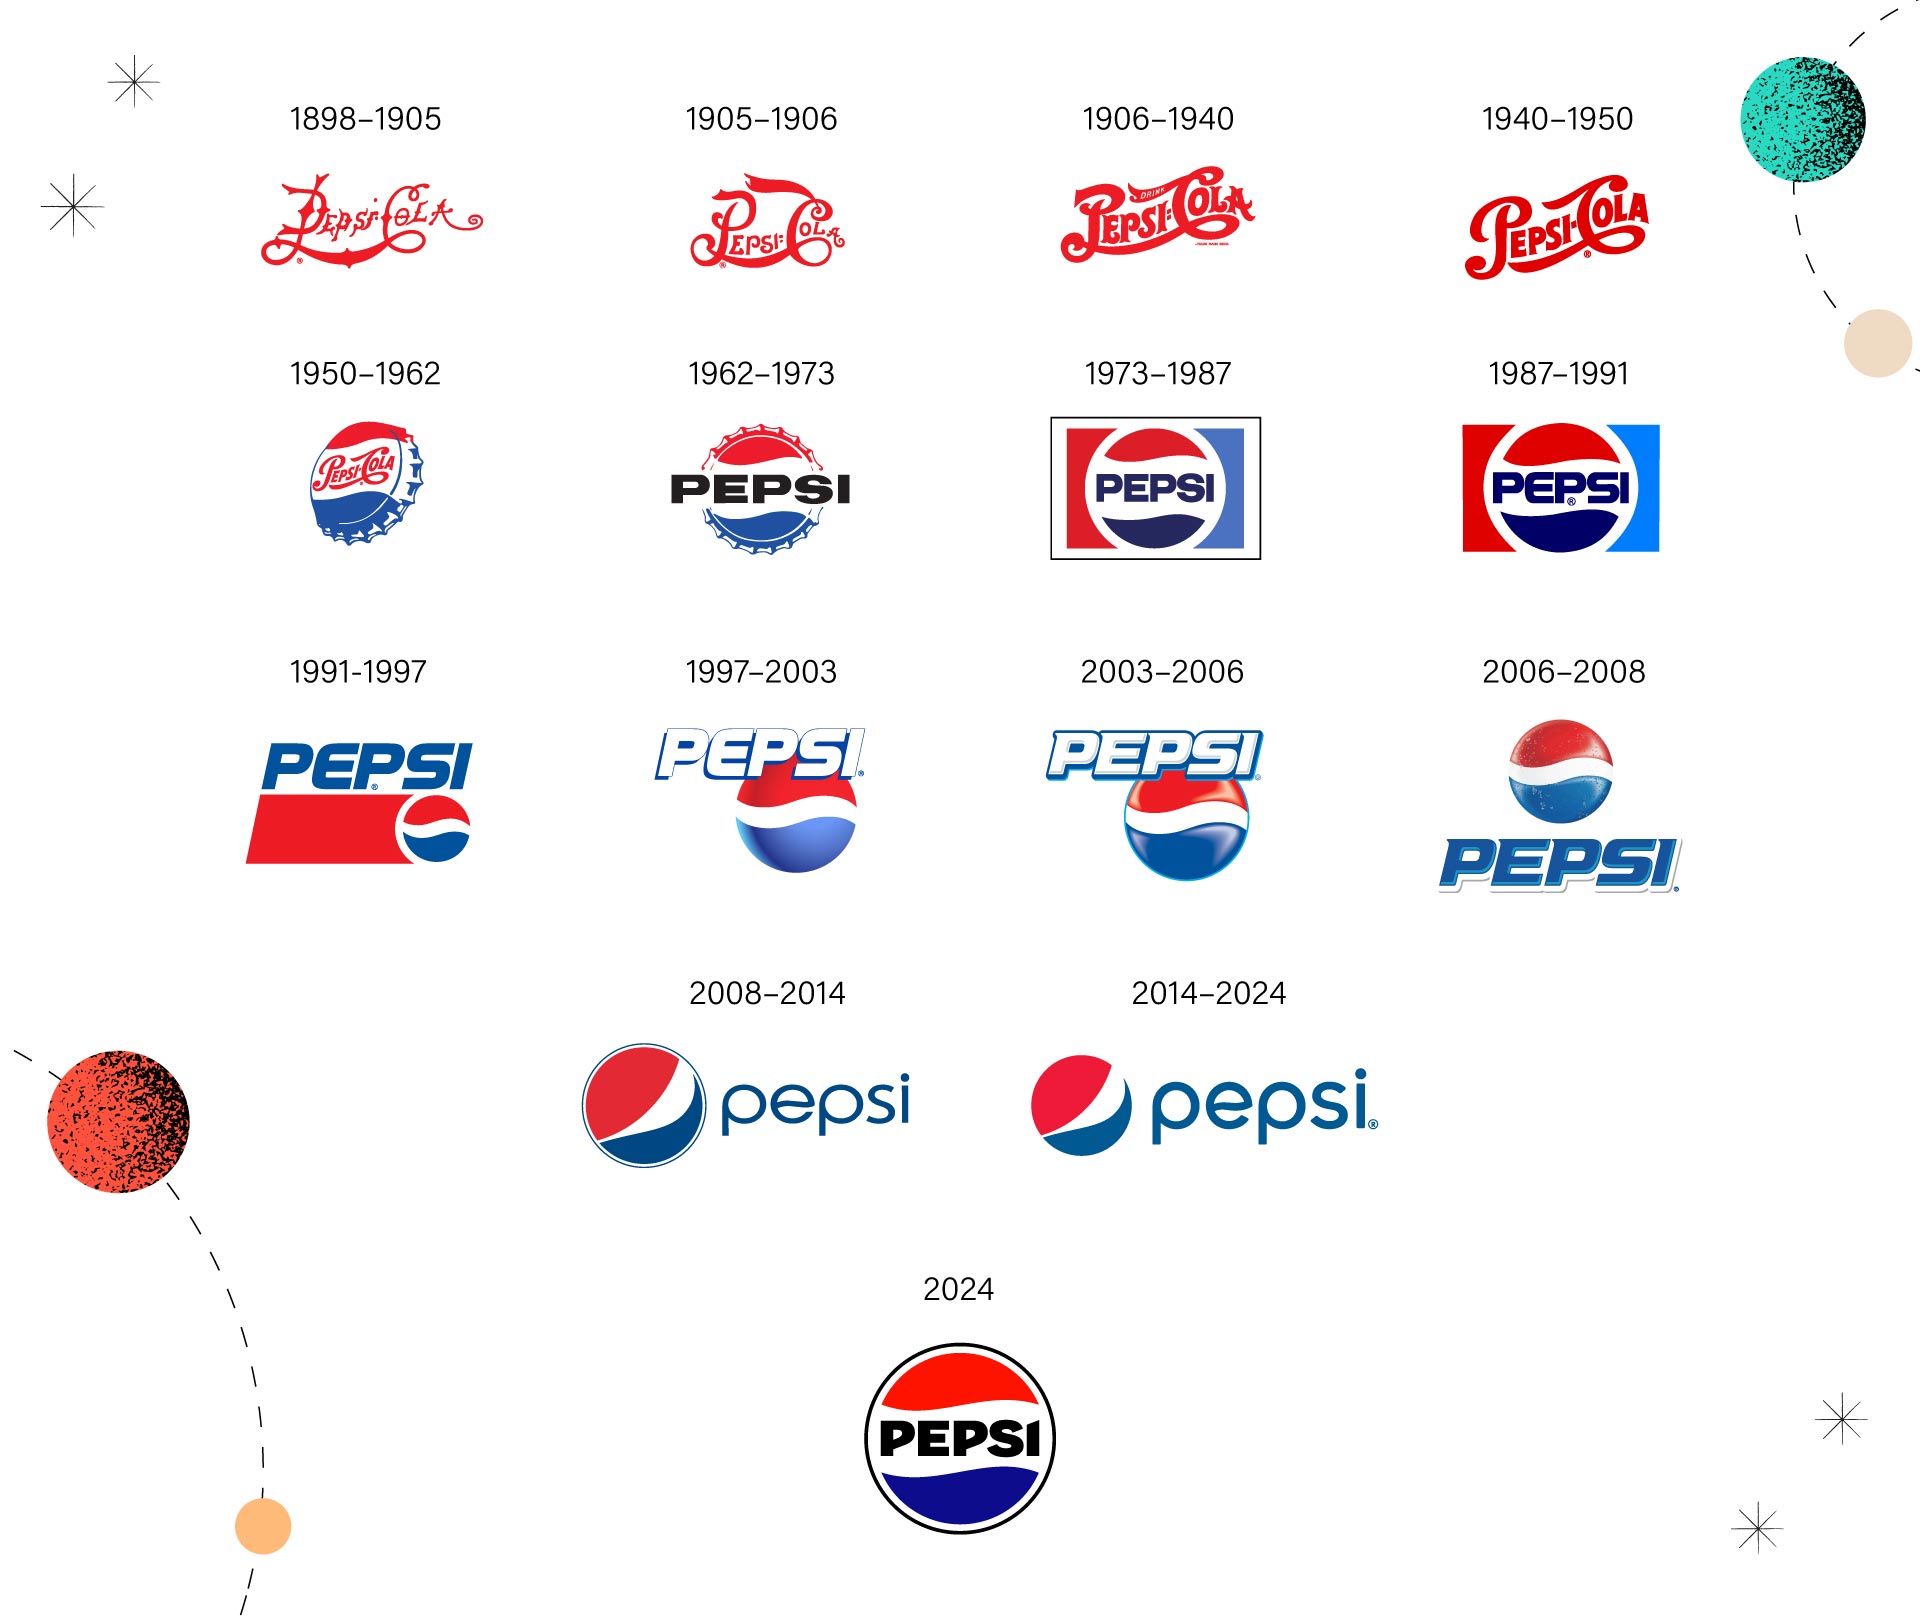 Brand on Stand Pepsi’s new logo and visual identity